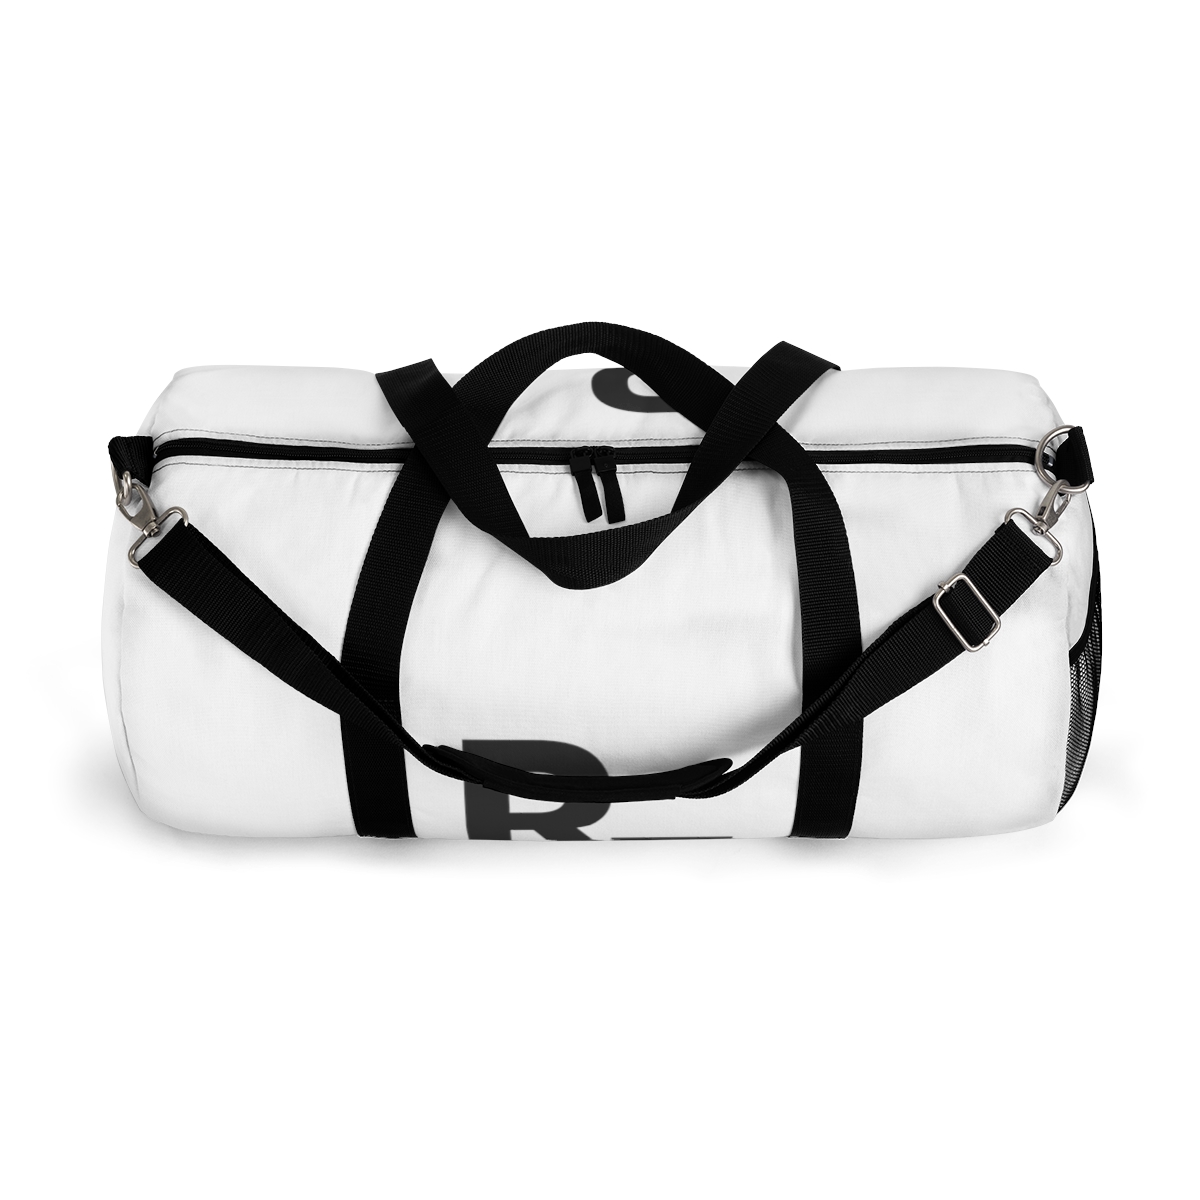 Re-Formed Fitness Duffel Bag product thumbnail image